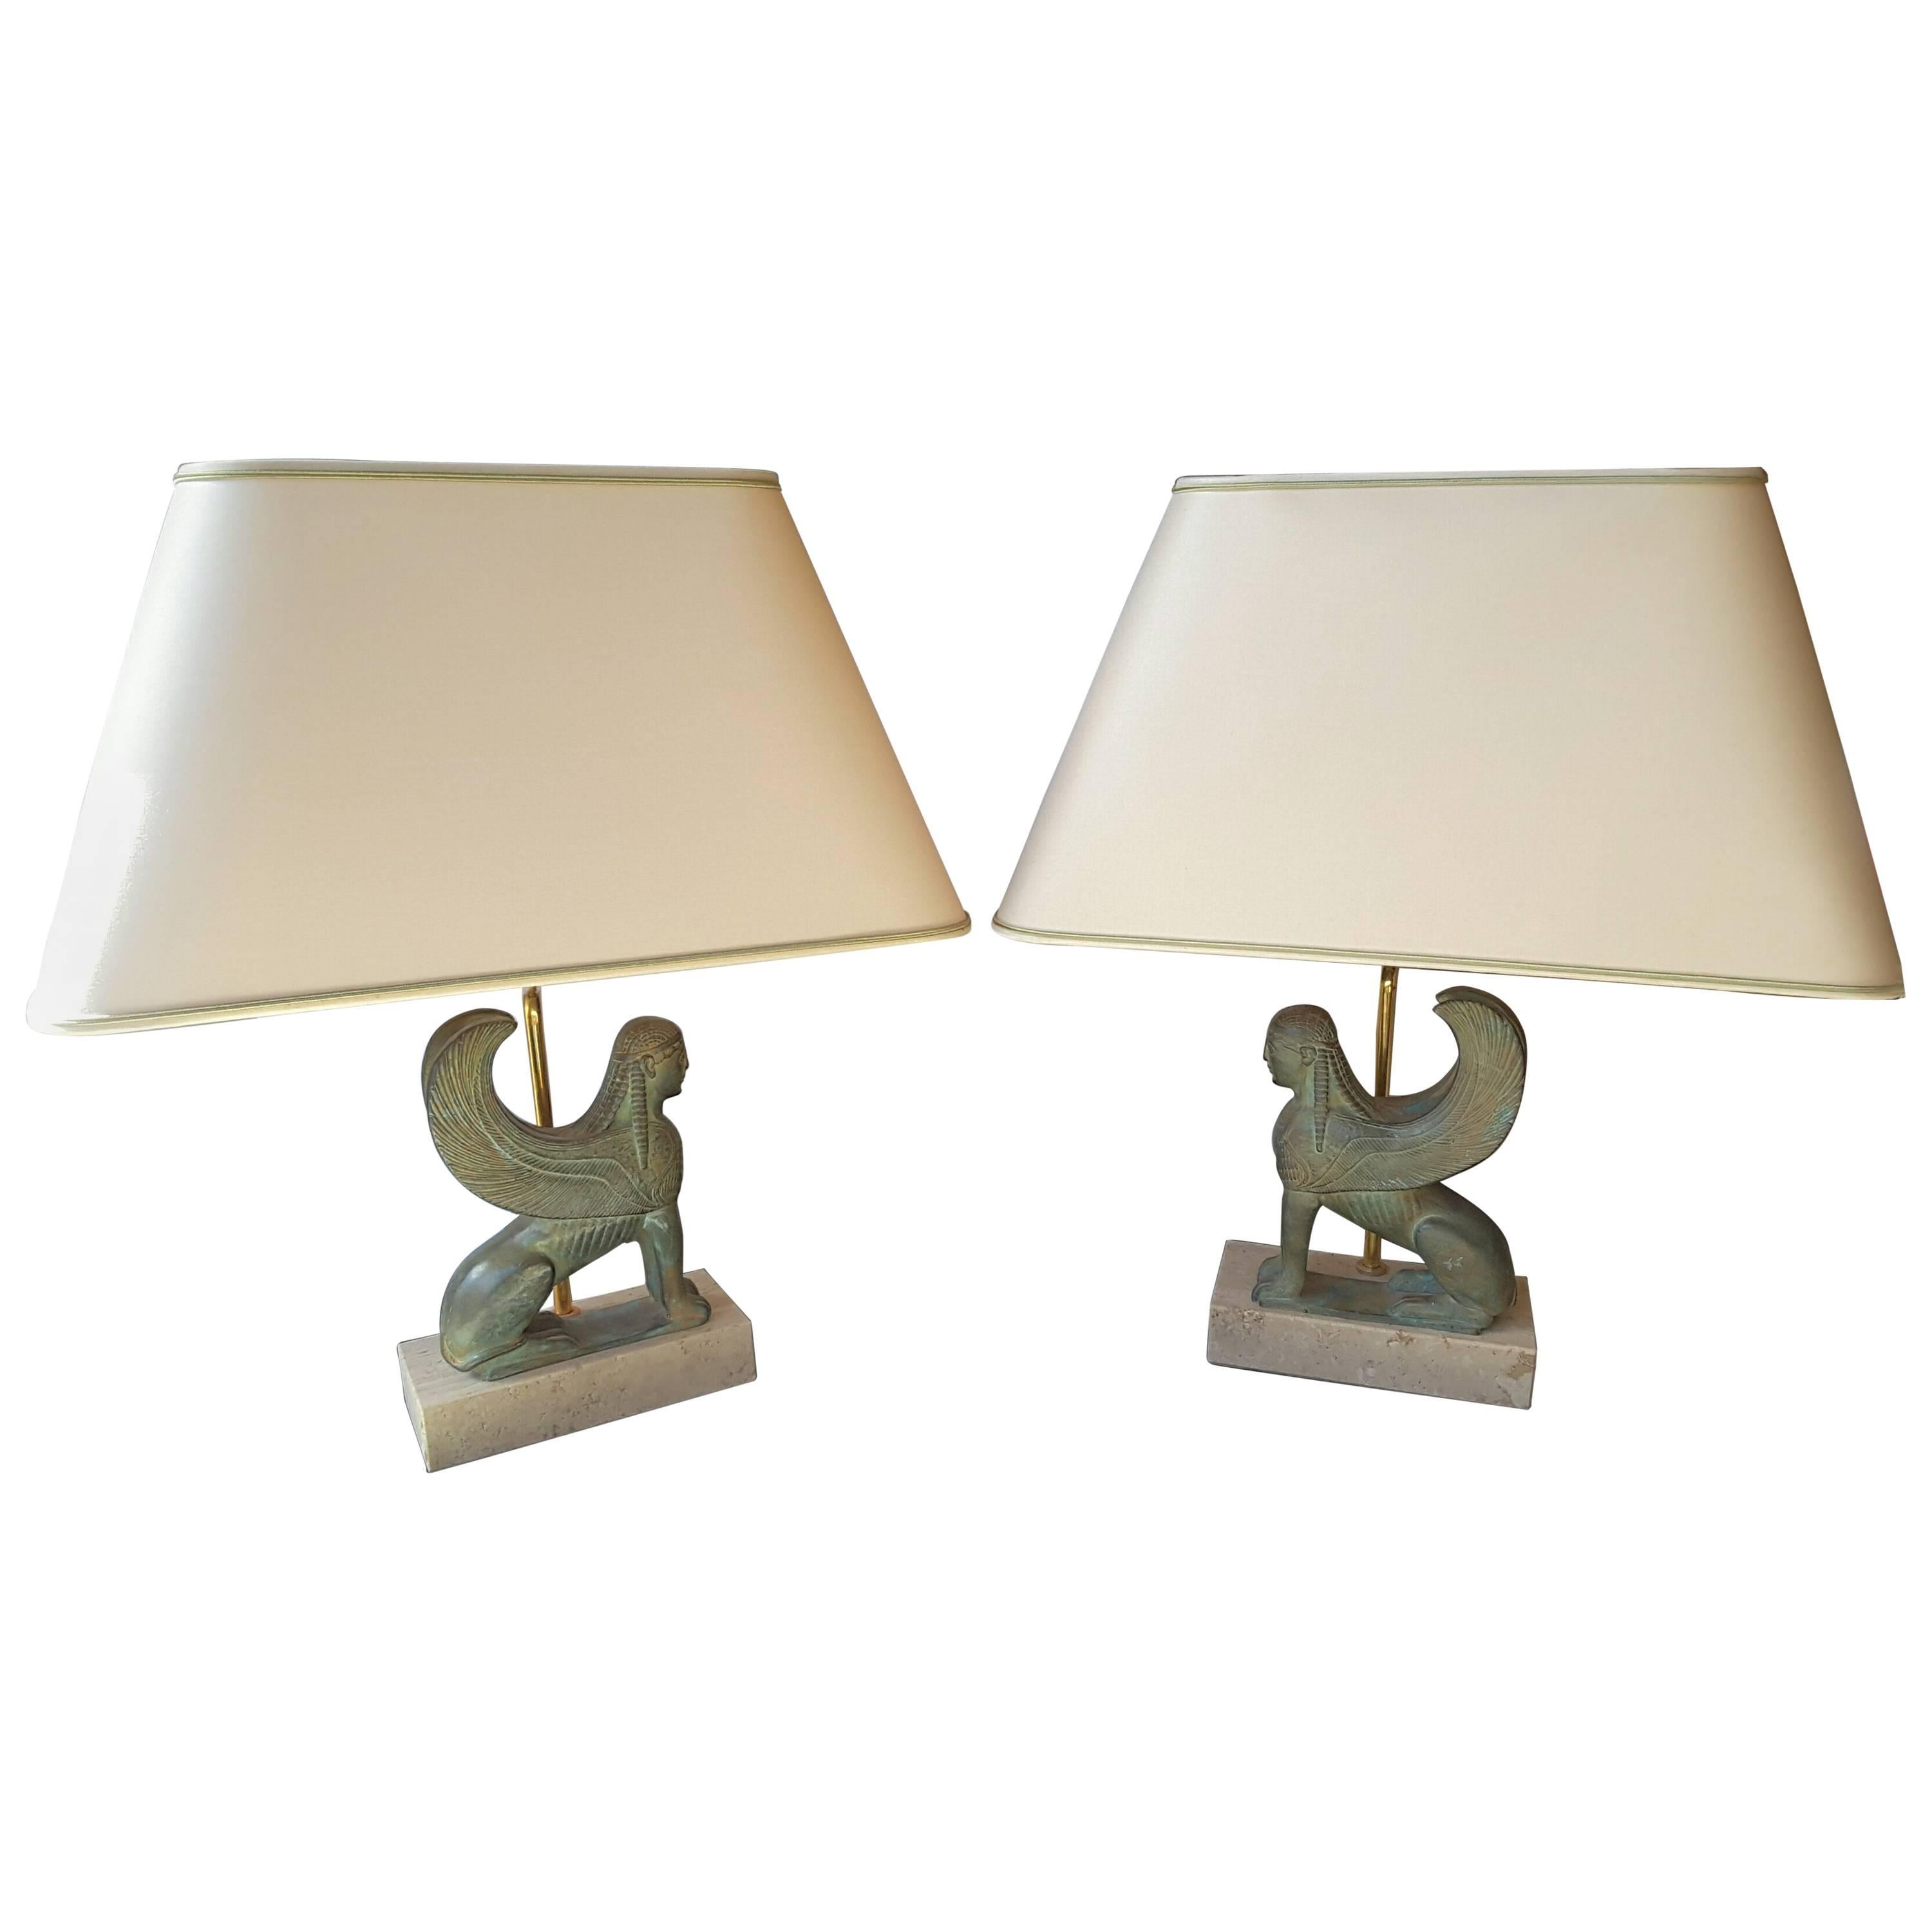 Maison Le Dauphin France, Vintage Pair of Exceptional Sphinx Table Lamps  For Sale at 1stDibs | sphinx lamp, le dauphin lamps, le dauphin france  lampen